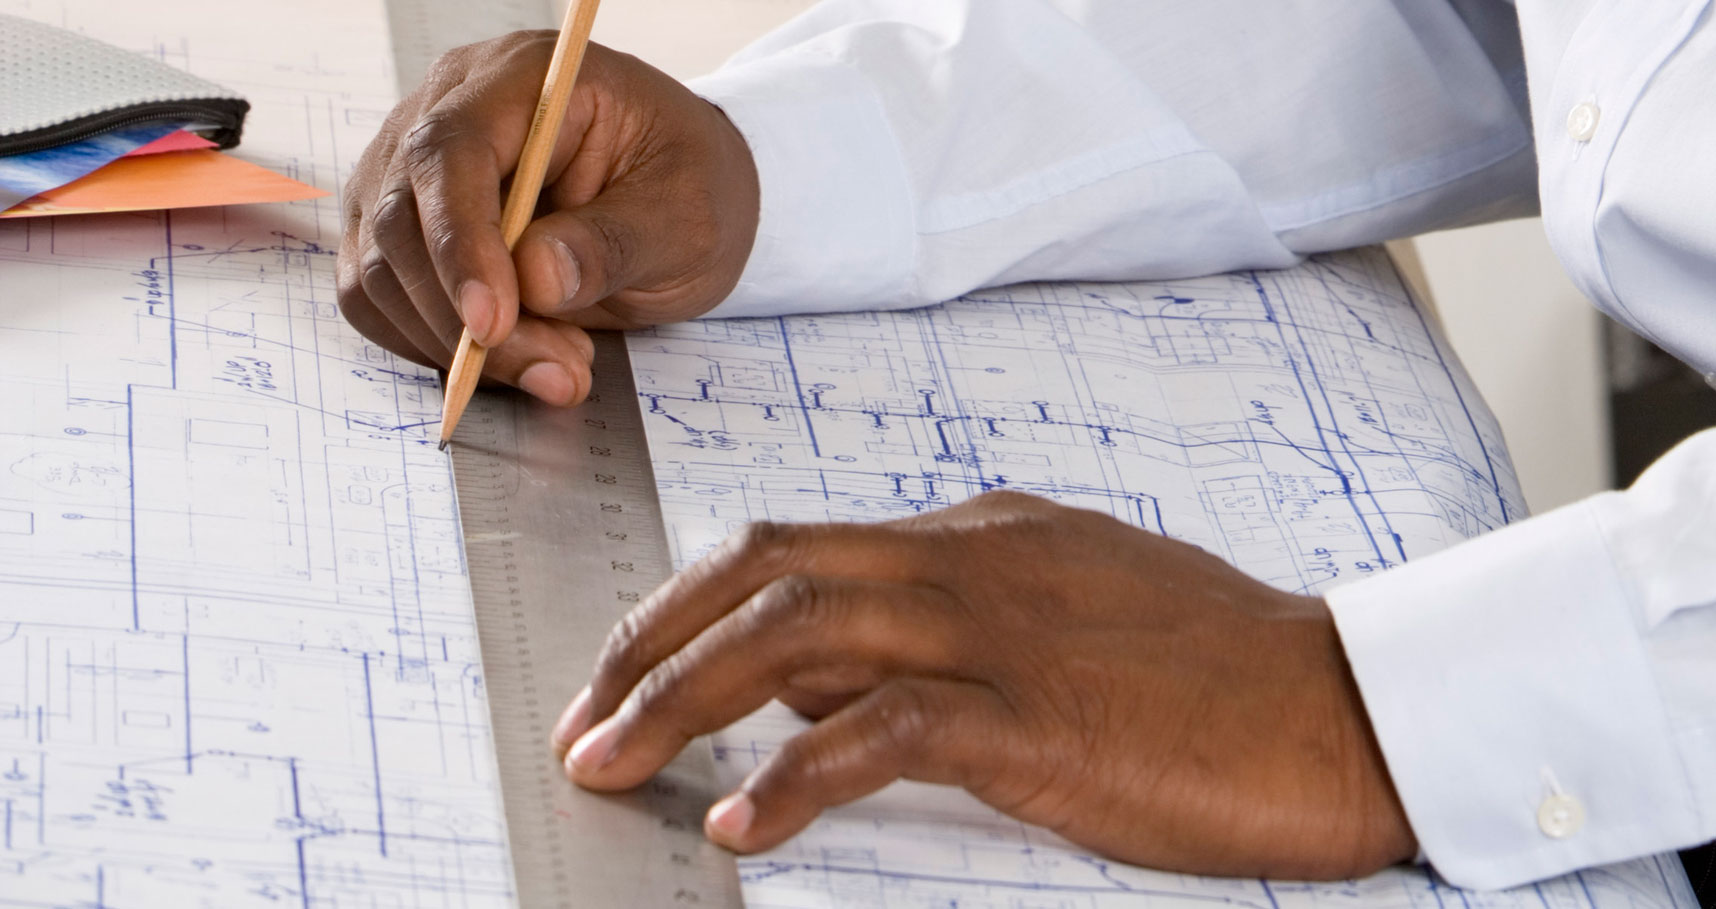 A man's hands drawing a blueprint on a drafting table.